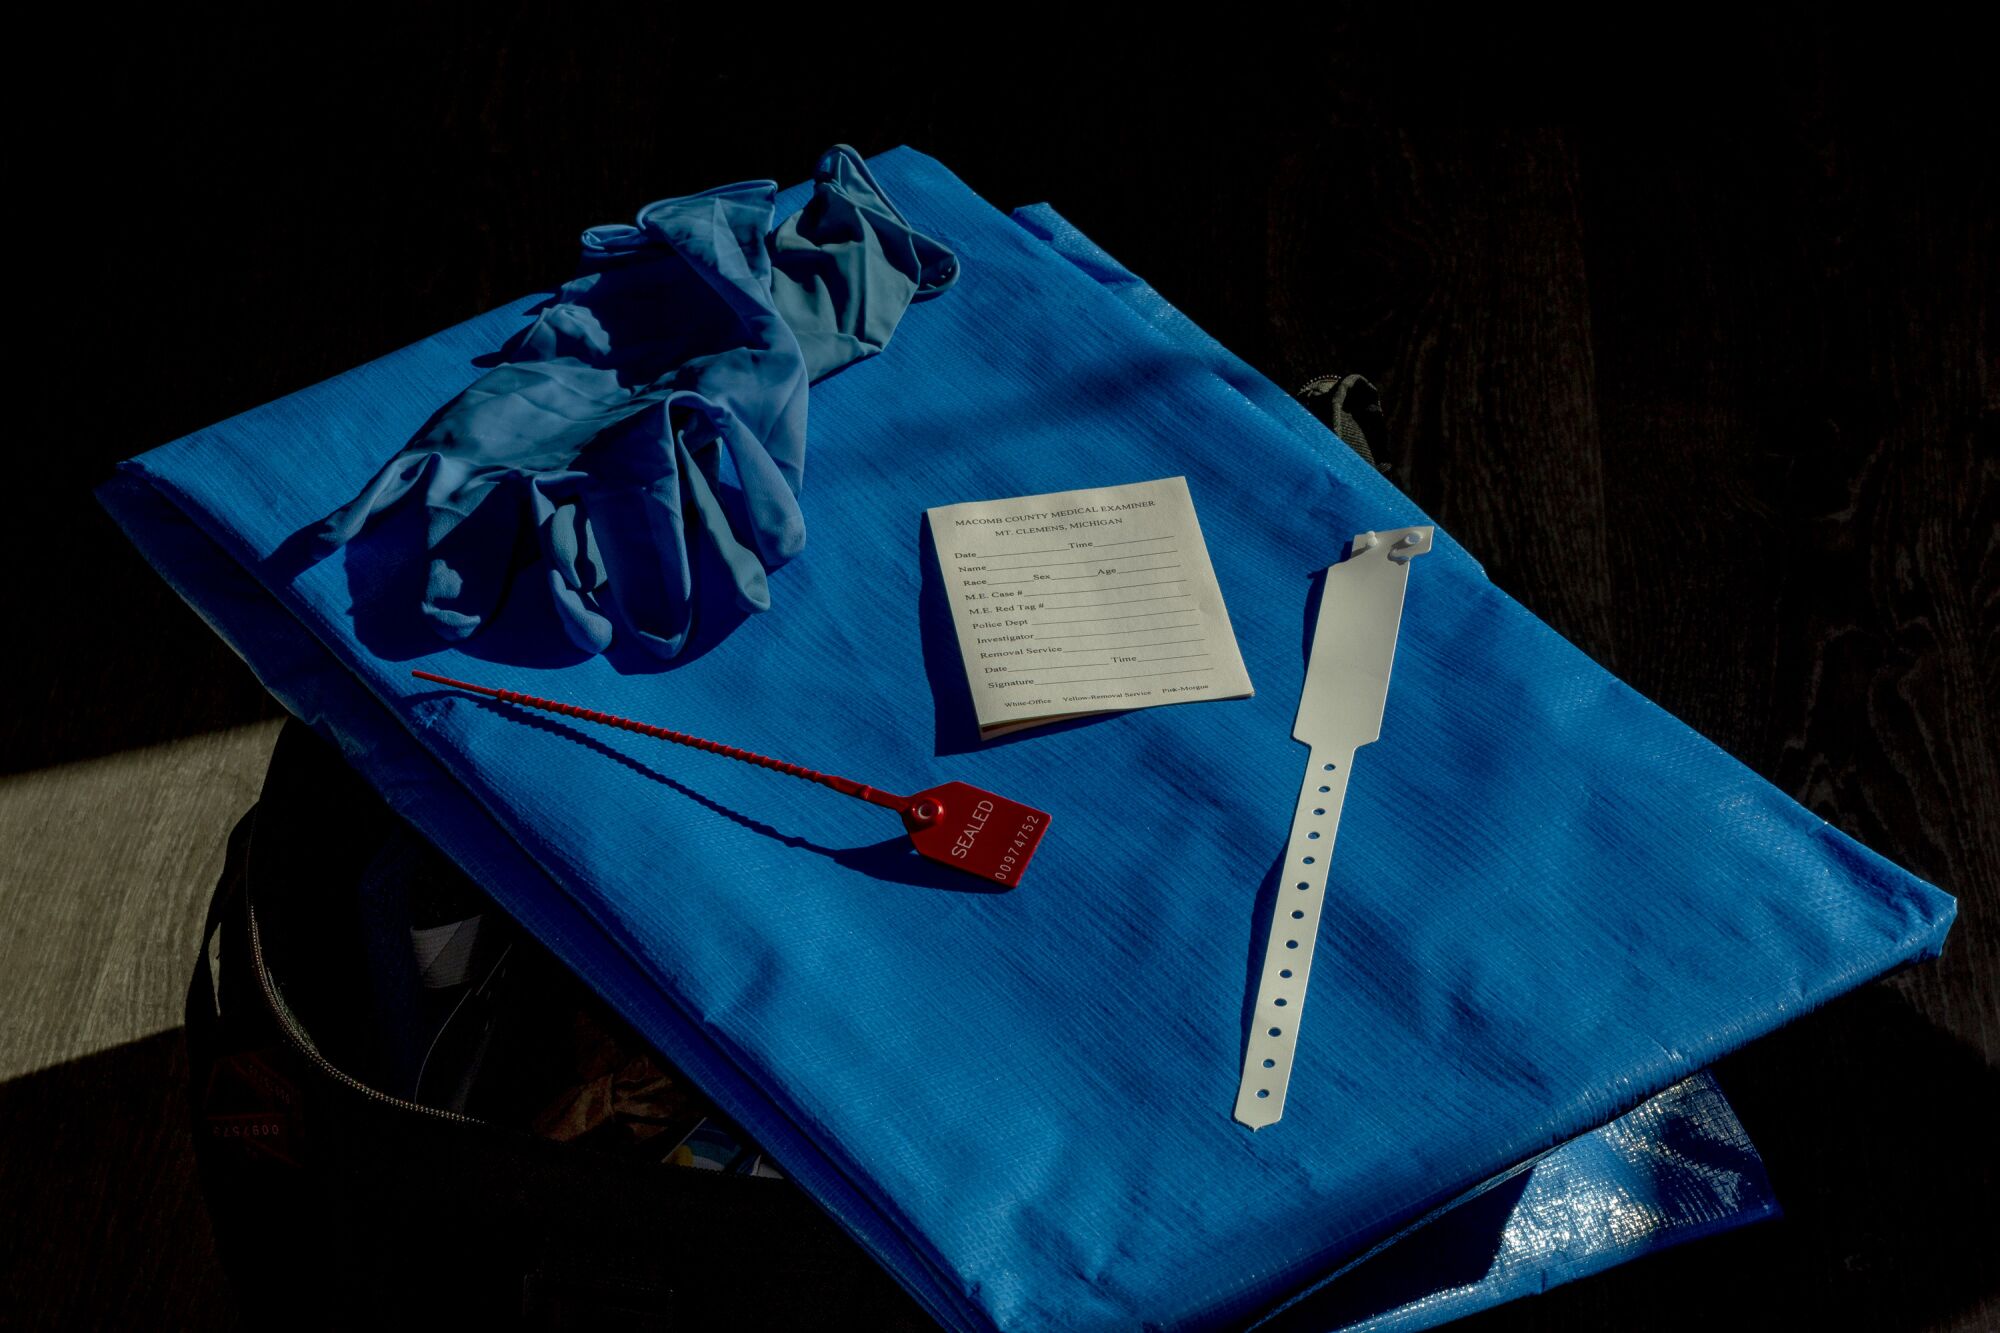 One of the blue body bags